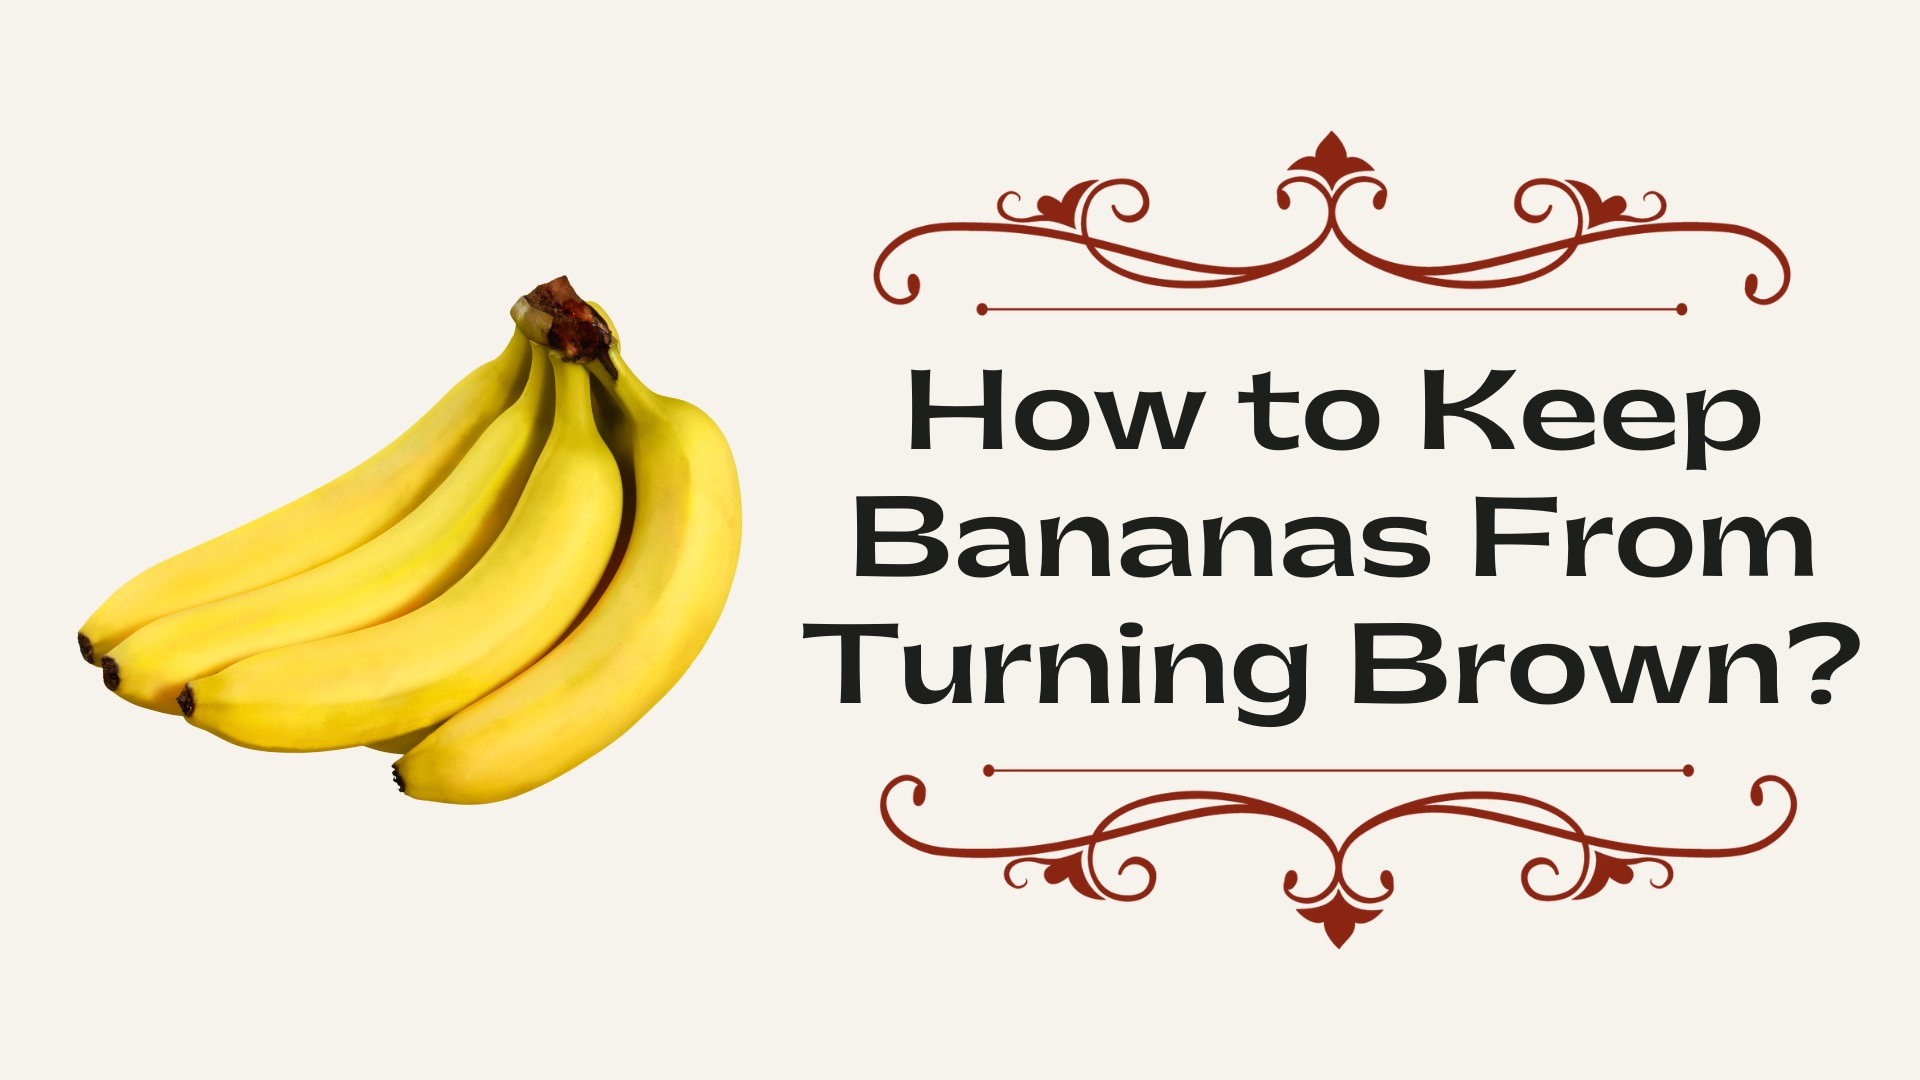 How to Keep Bananas From Turning Brown